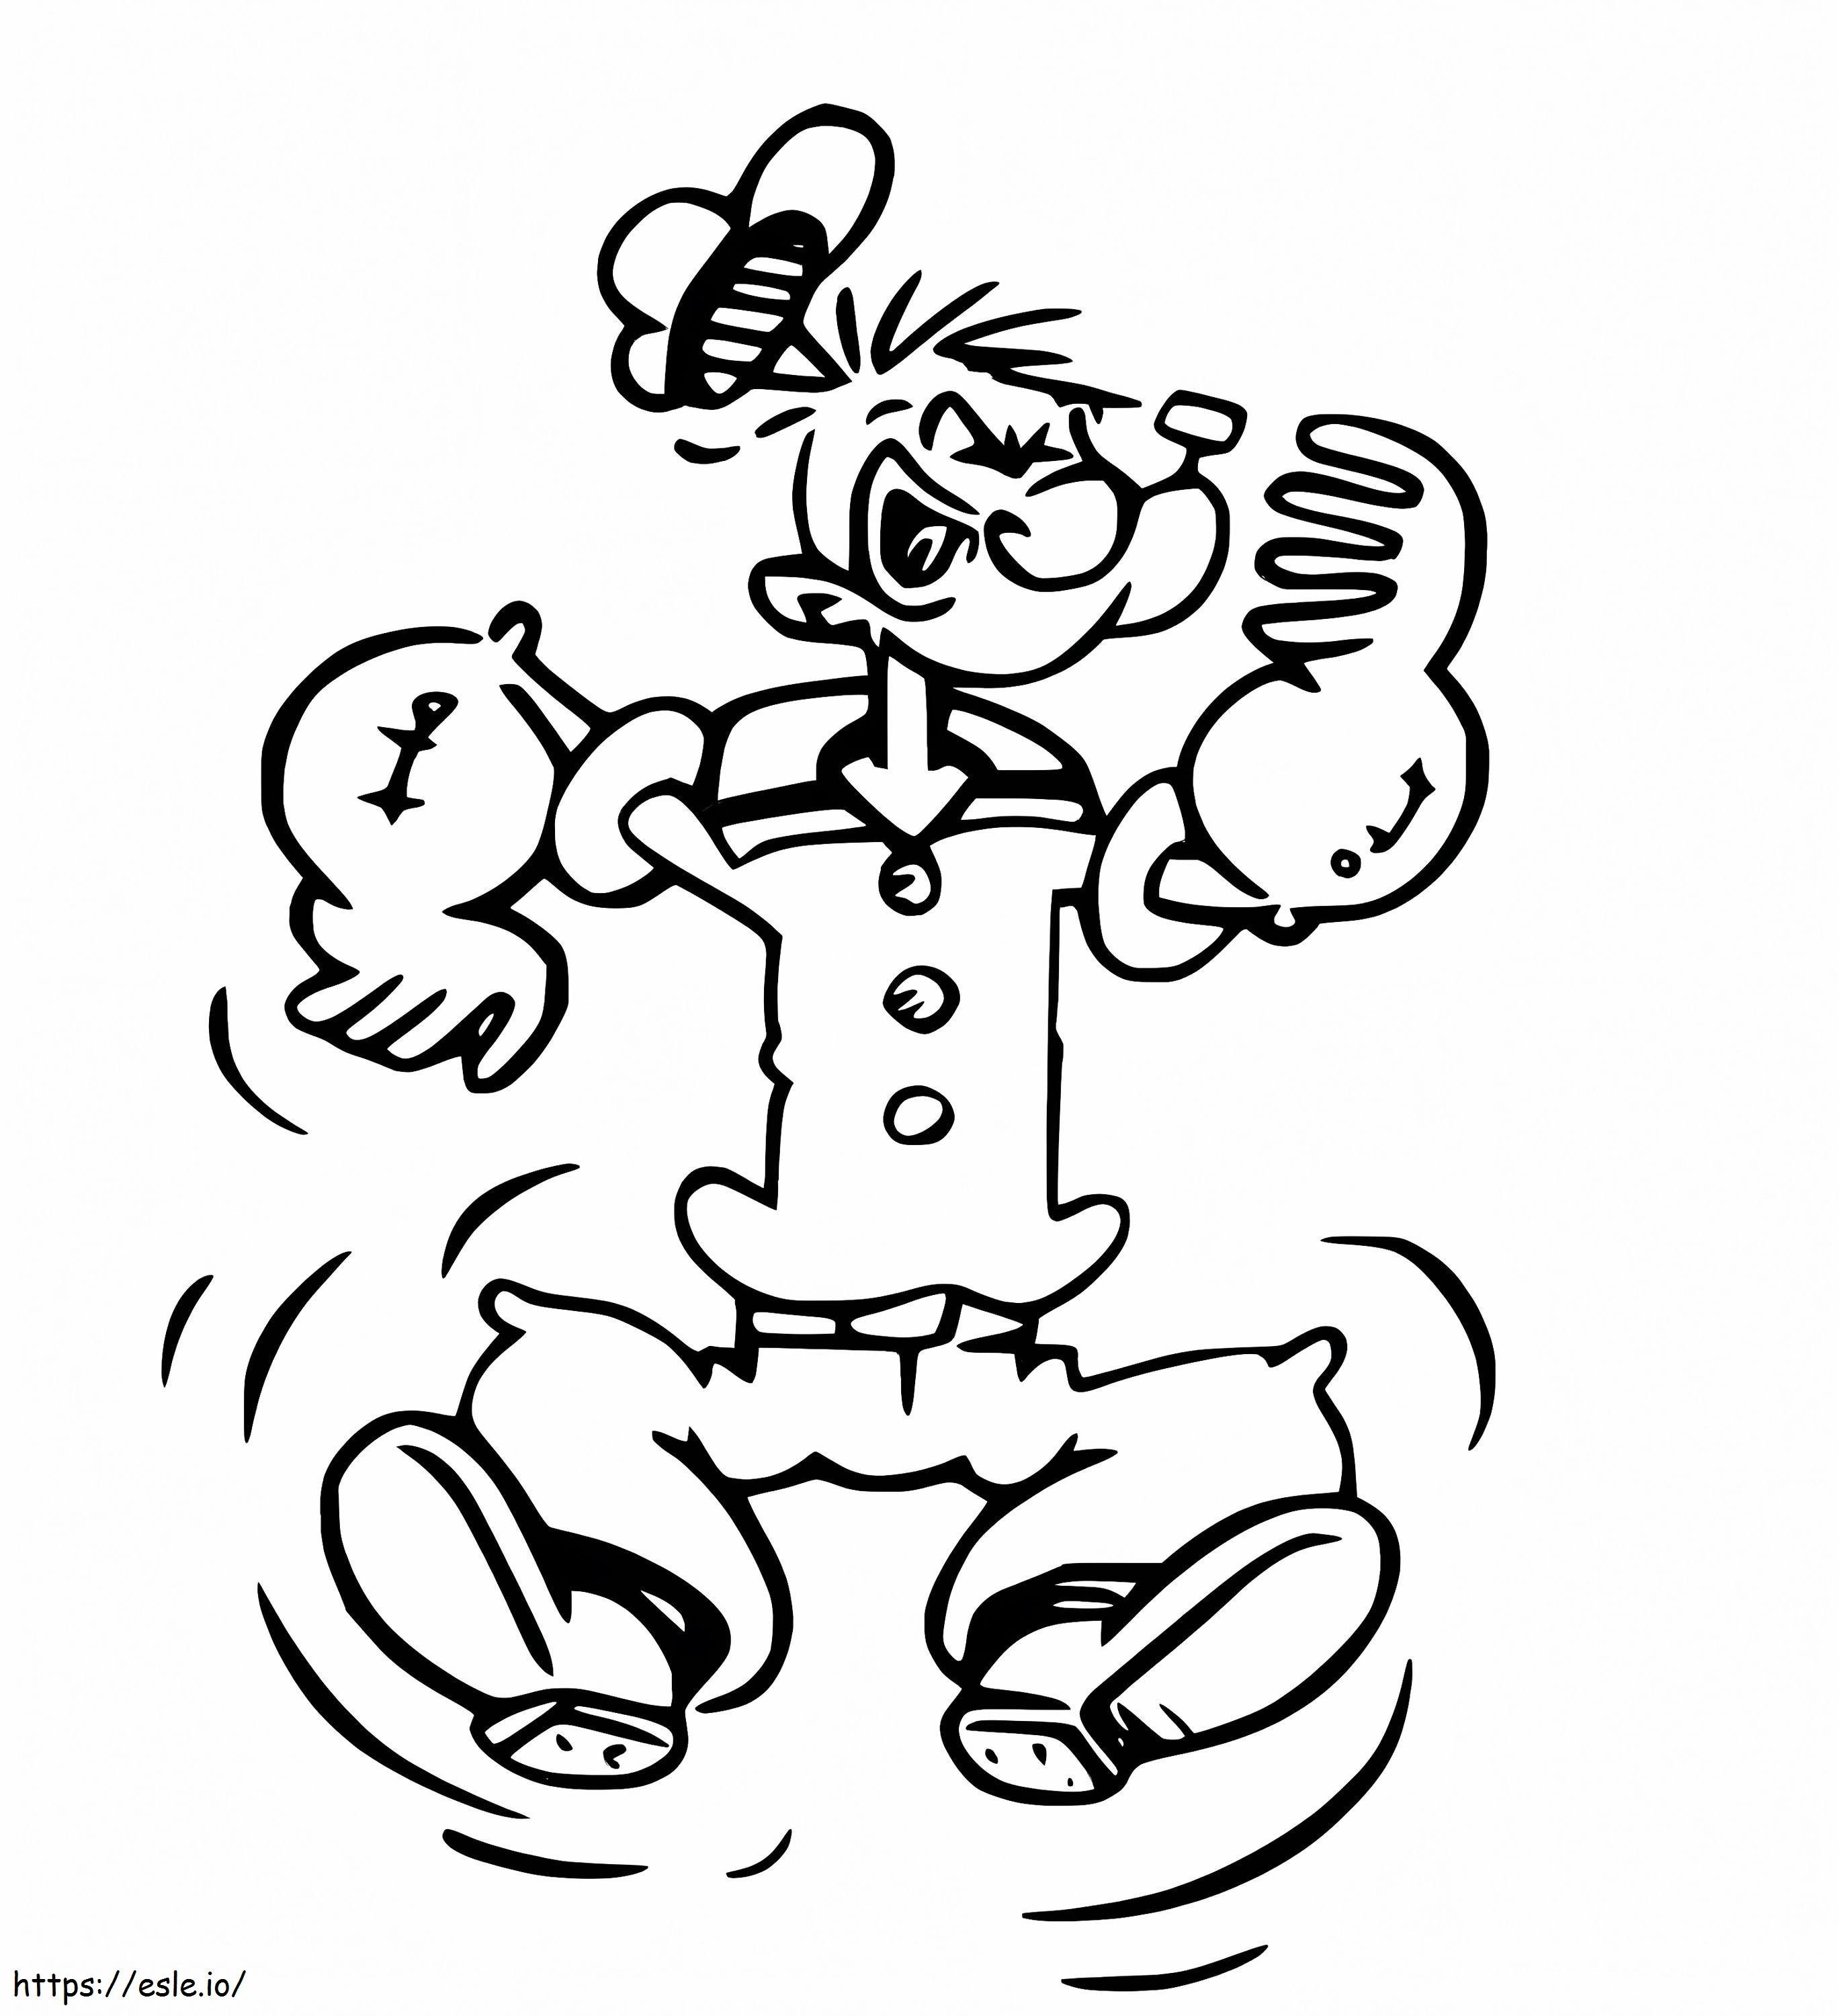 Popeye Jumping coloring page